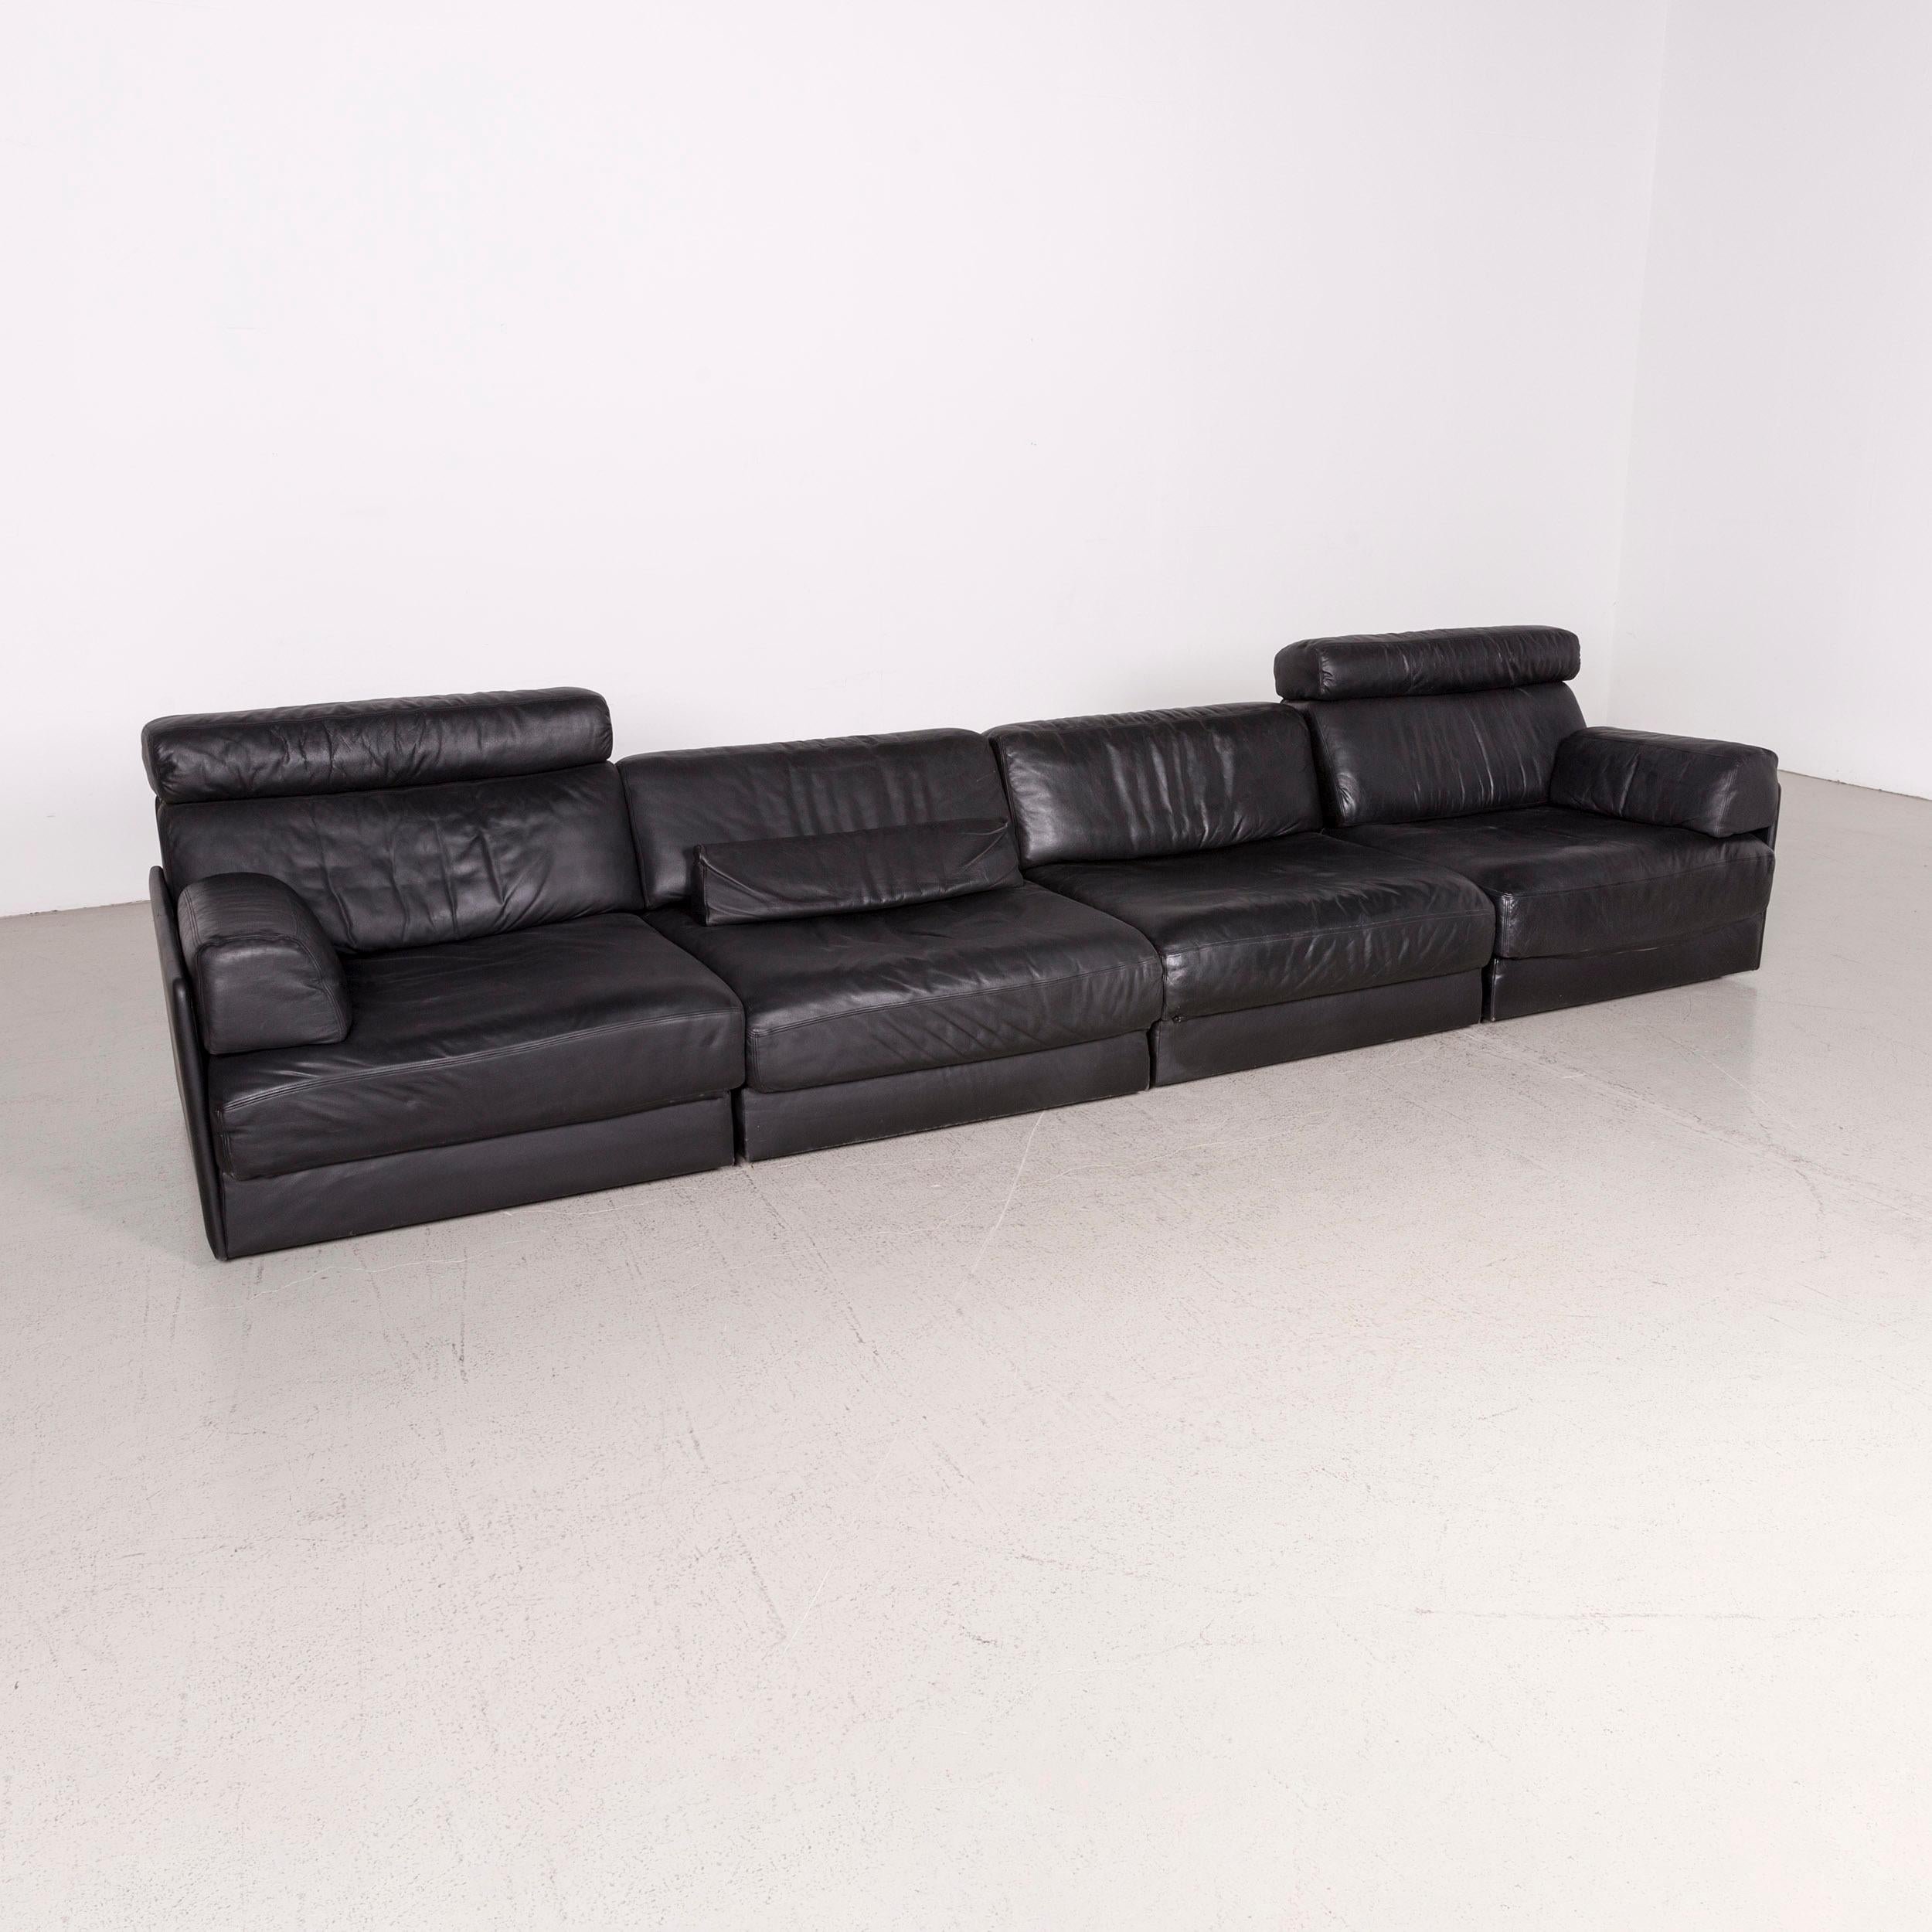 We bring to you a de Sede ds 77 designer leather sofa black four-seat genuine leather.

Product measurements in centimeters:

Depth 100
Width 375
Height 70
Seat-height 40
Rest-height 60
Seat-depth 60
Seat-width 320
Back-height 40.

 